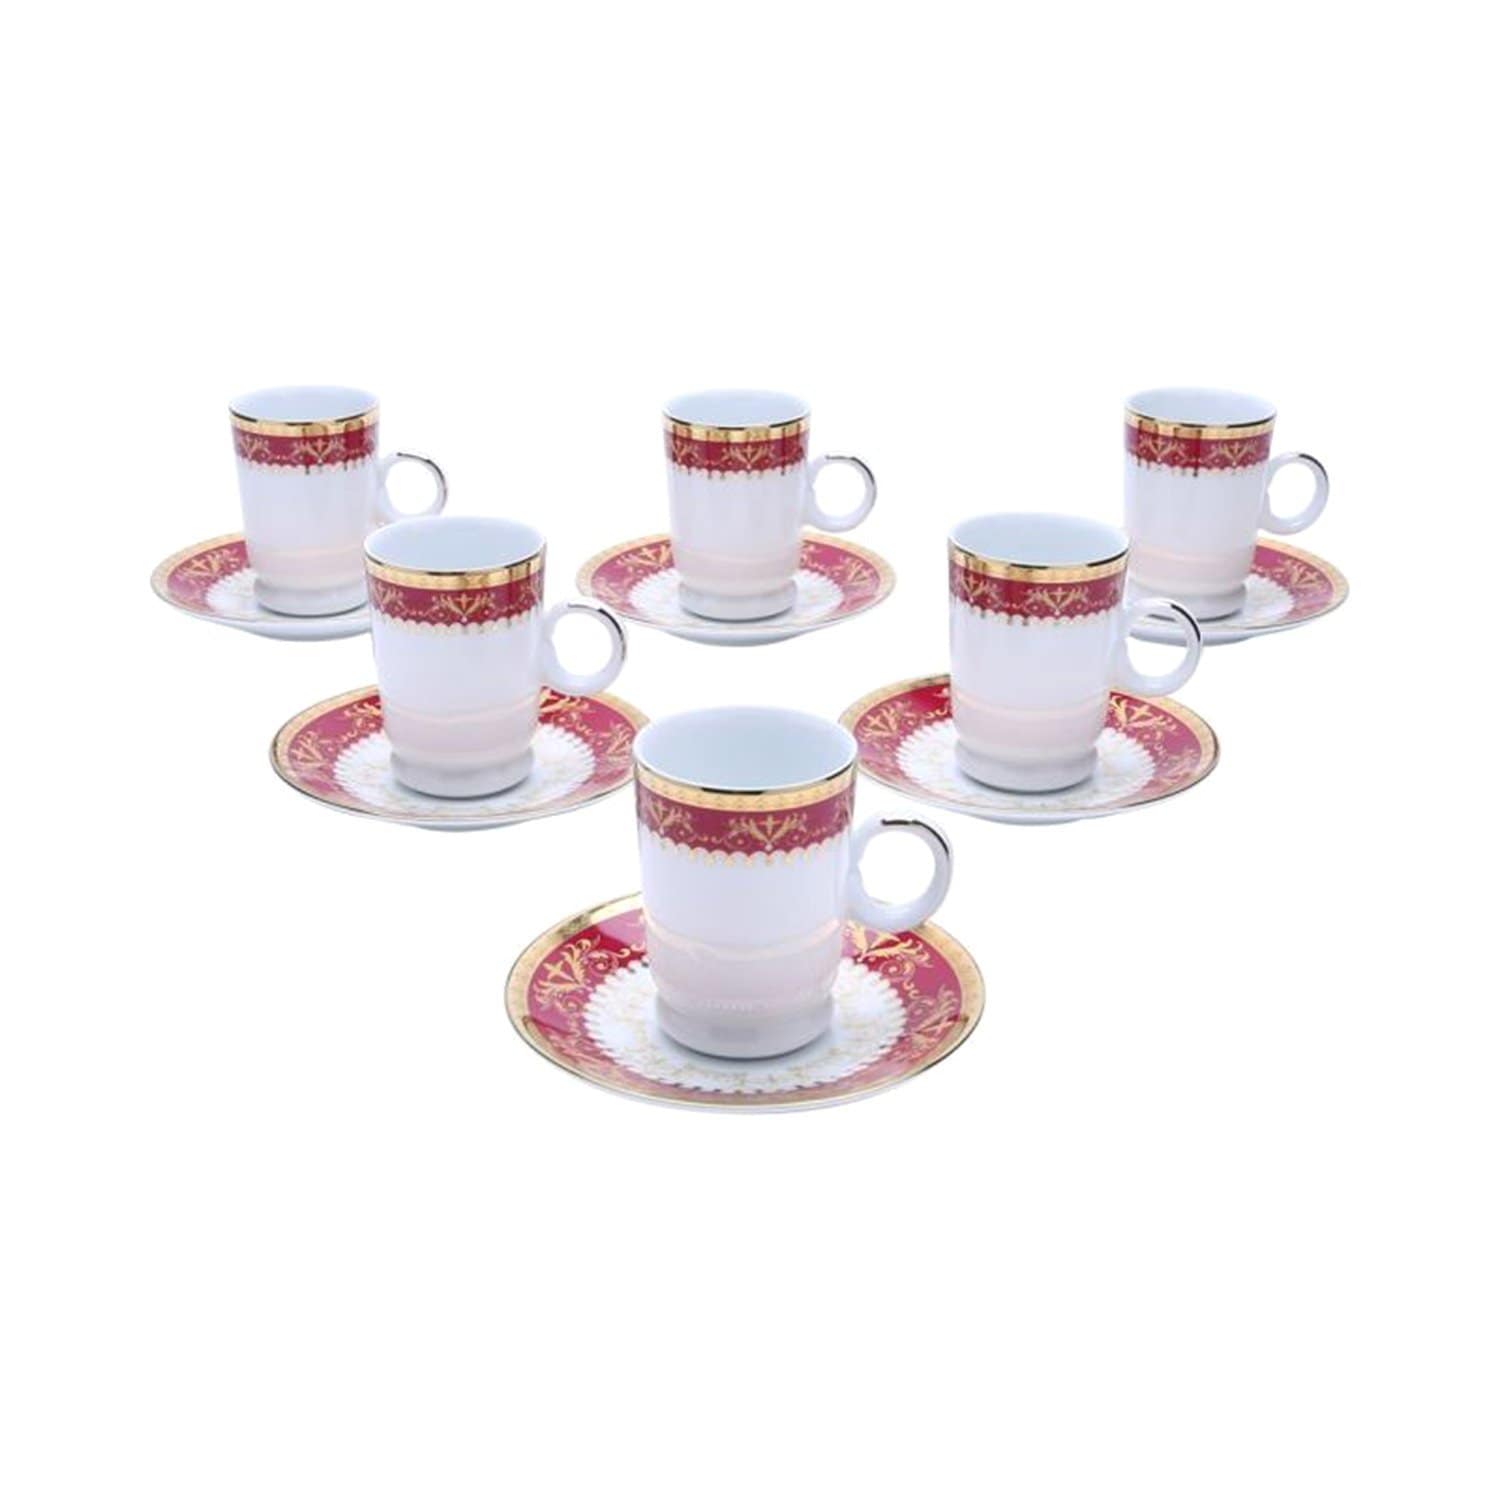 Dankotuwa Shaina16 Istikan Cup and Saucer - Red and White, Set of 12 - SHAIRED-6582/83 - Jashanmal Home